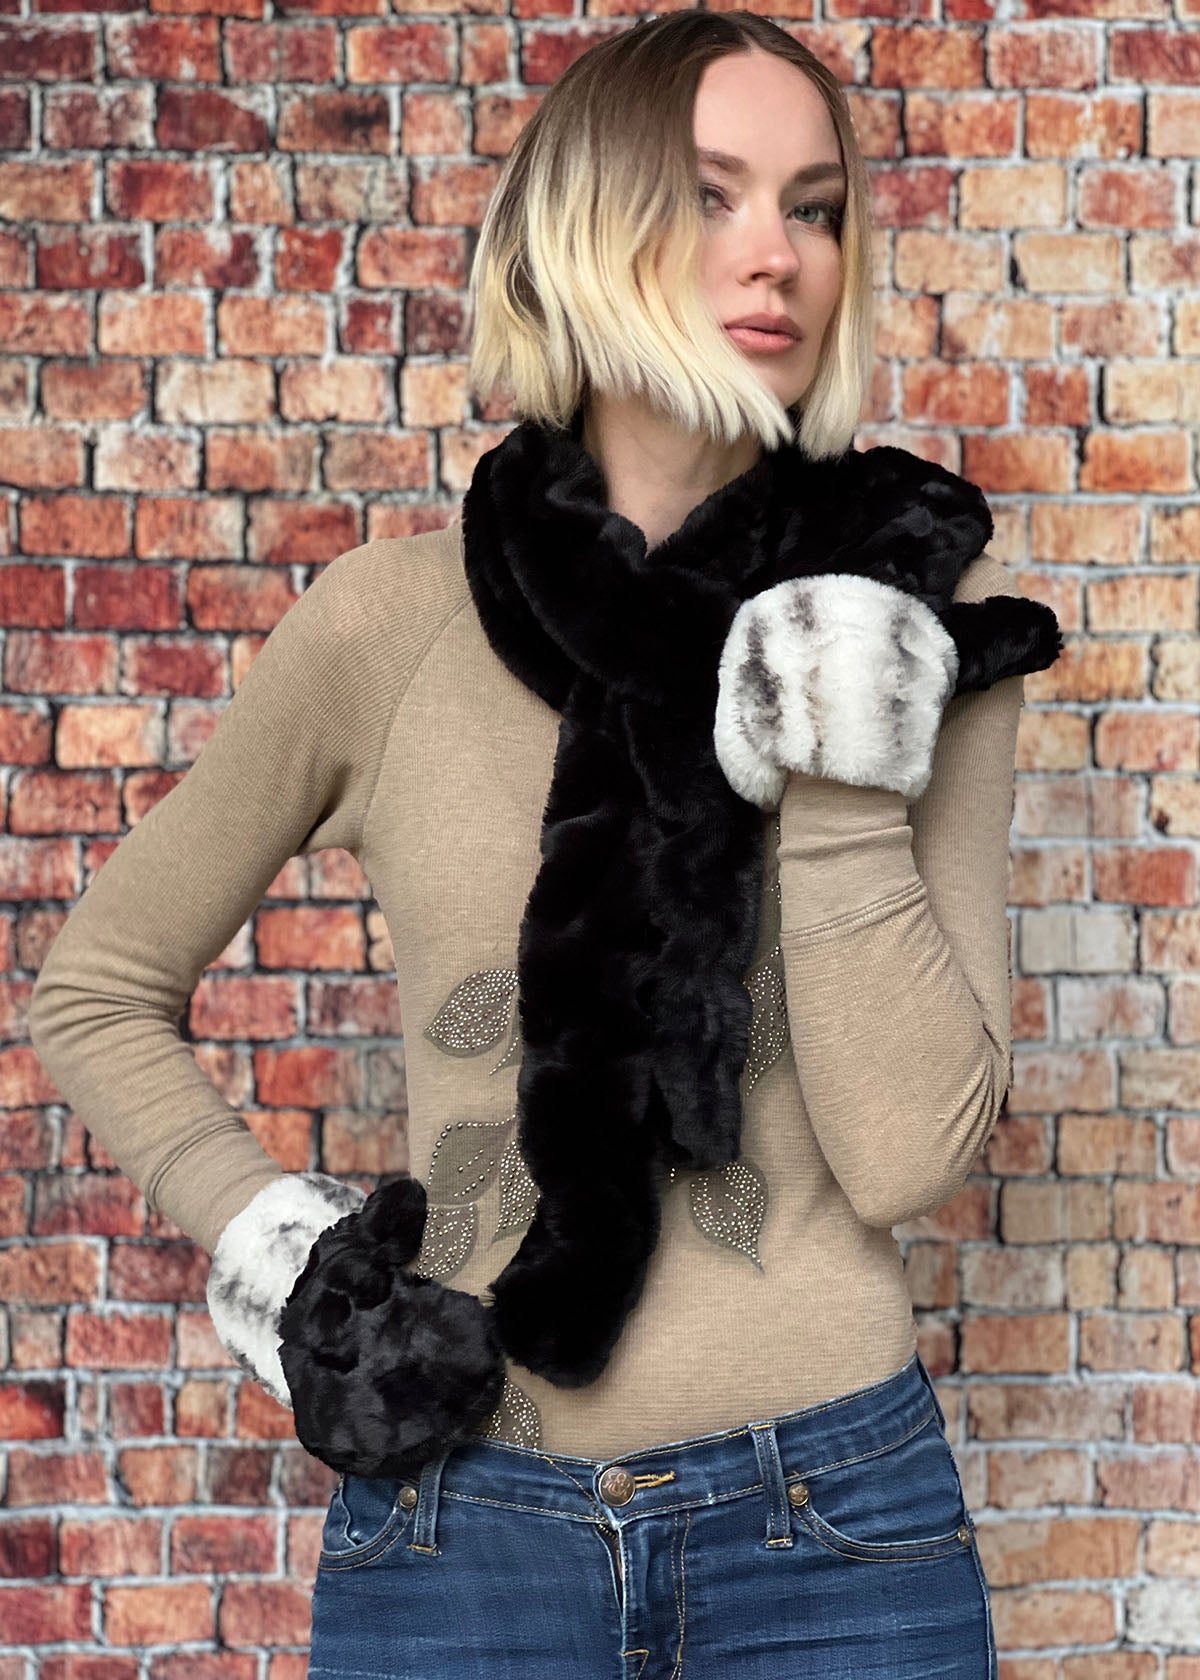 Woman wearing the Royal Opulence Skinny Scarf in Onyx with Royal Opulence Mittens in Snow Leopard Cuffs with Cuddly Black Faux Fur. Handmade by Pandemonium Seattle.